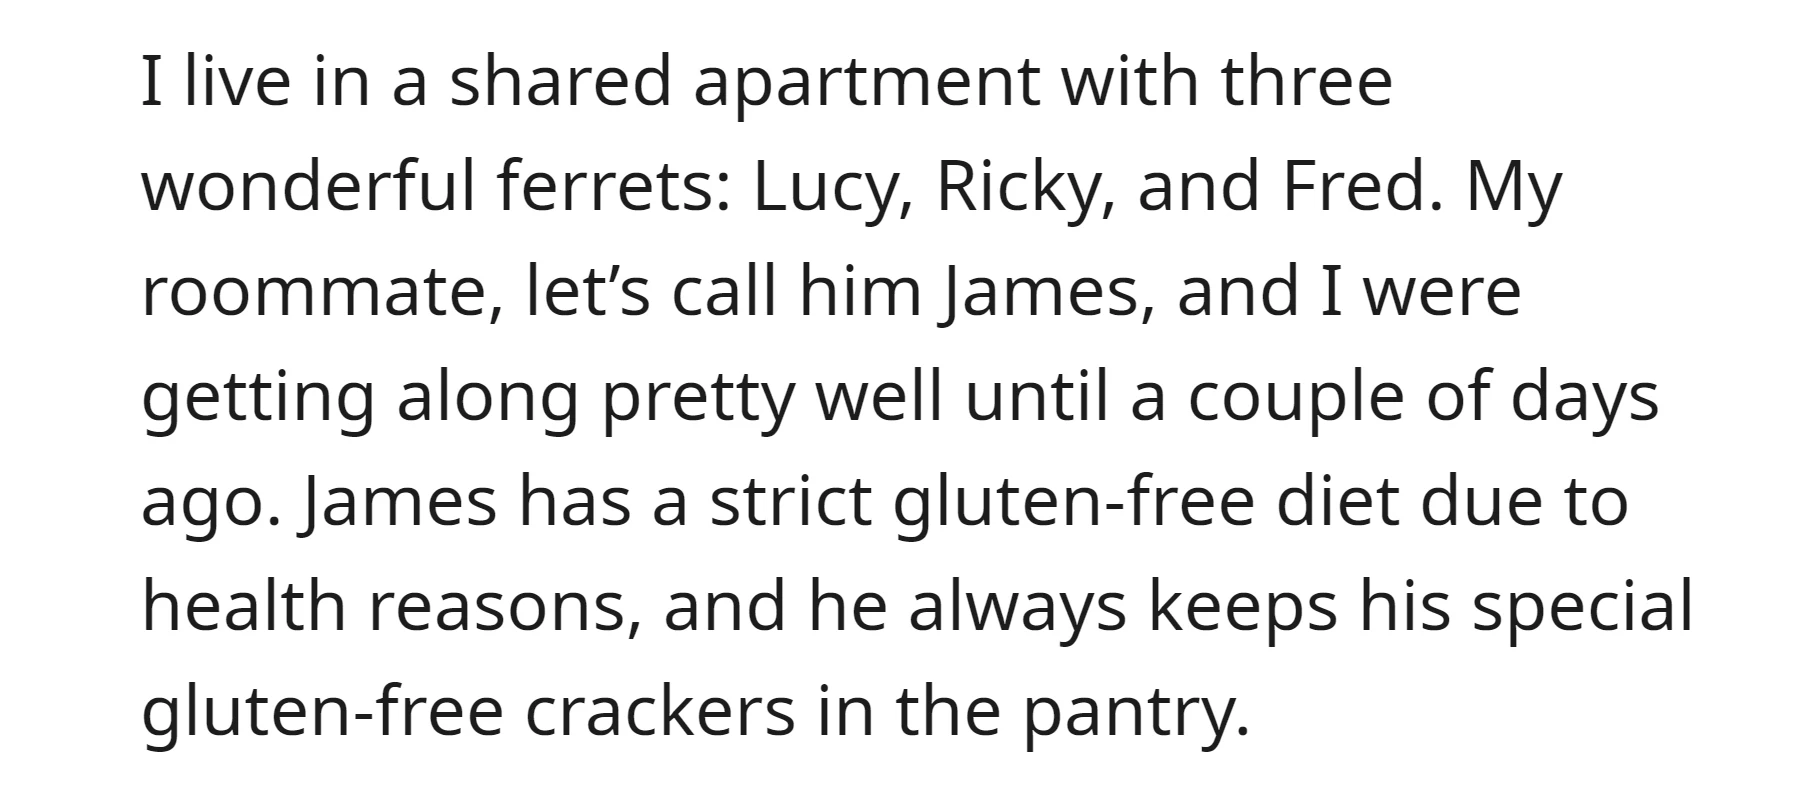 OP lives with 3 ferrets and a guy who always keeps his crackers in the pantry